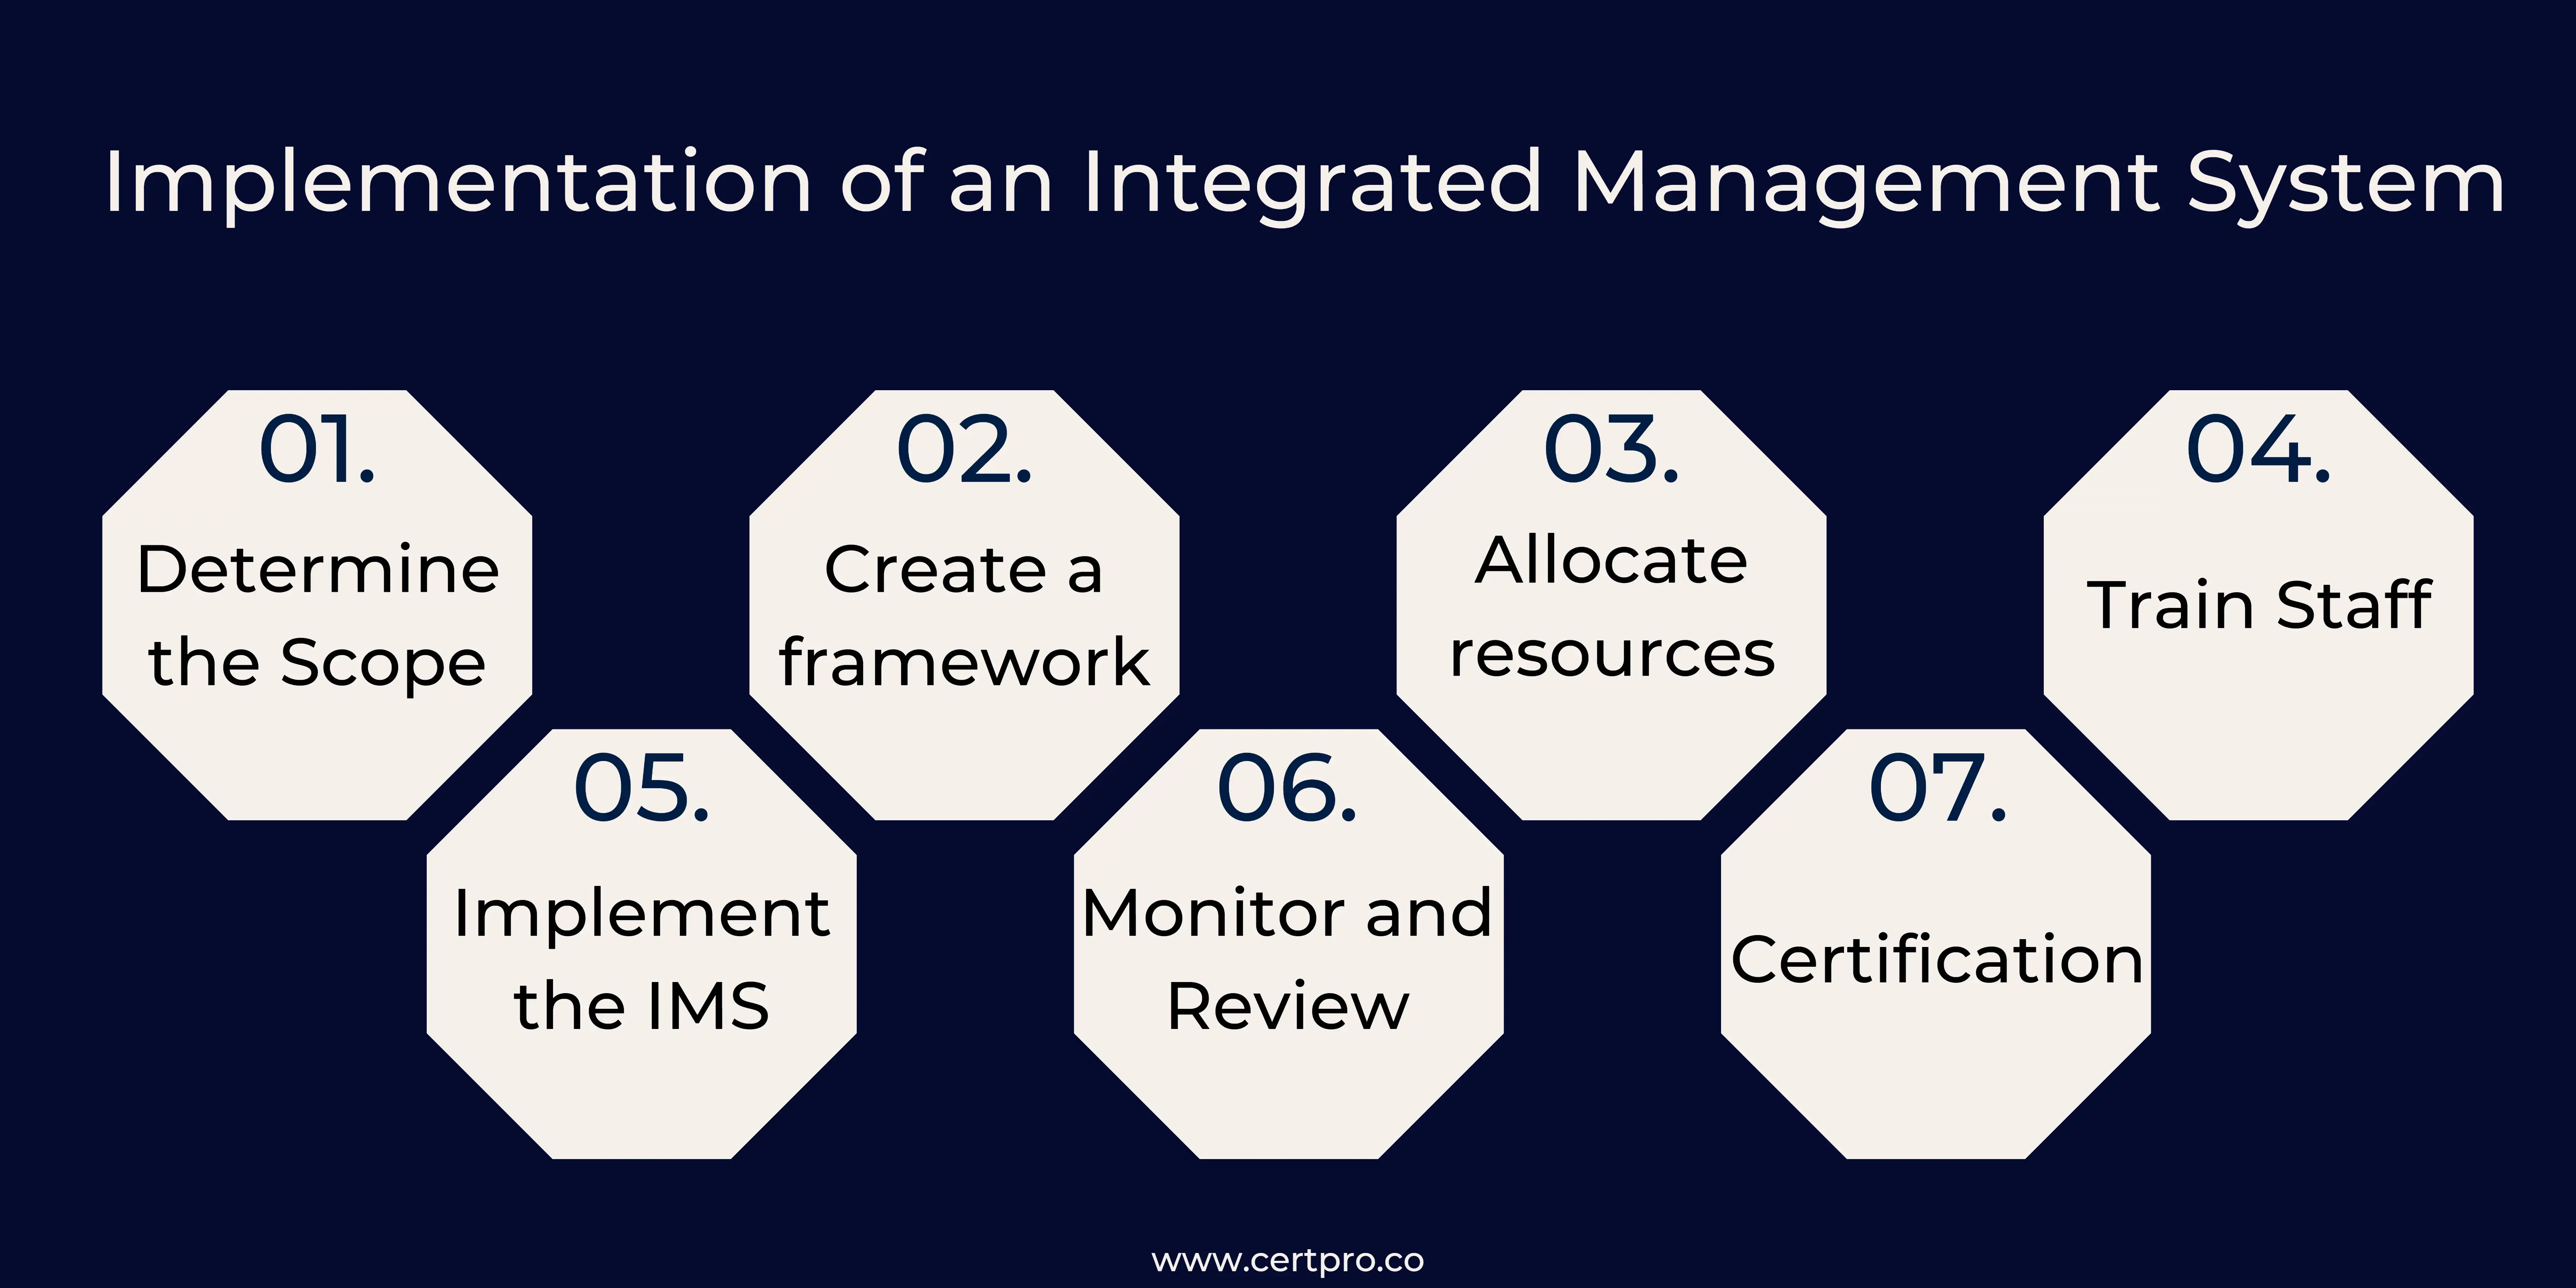 Implementation of IMS